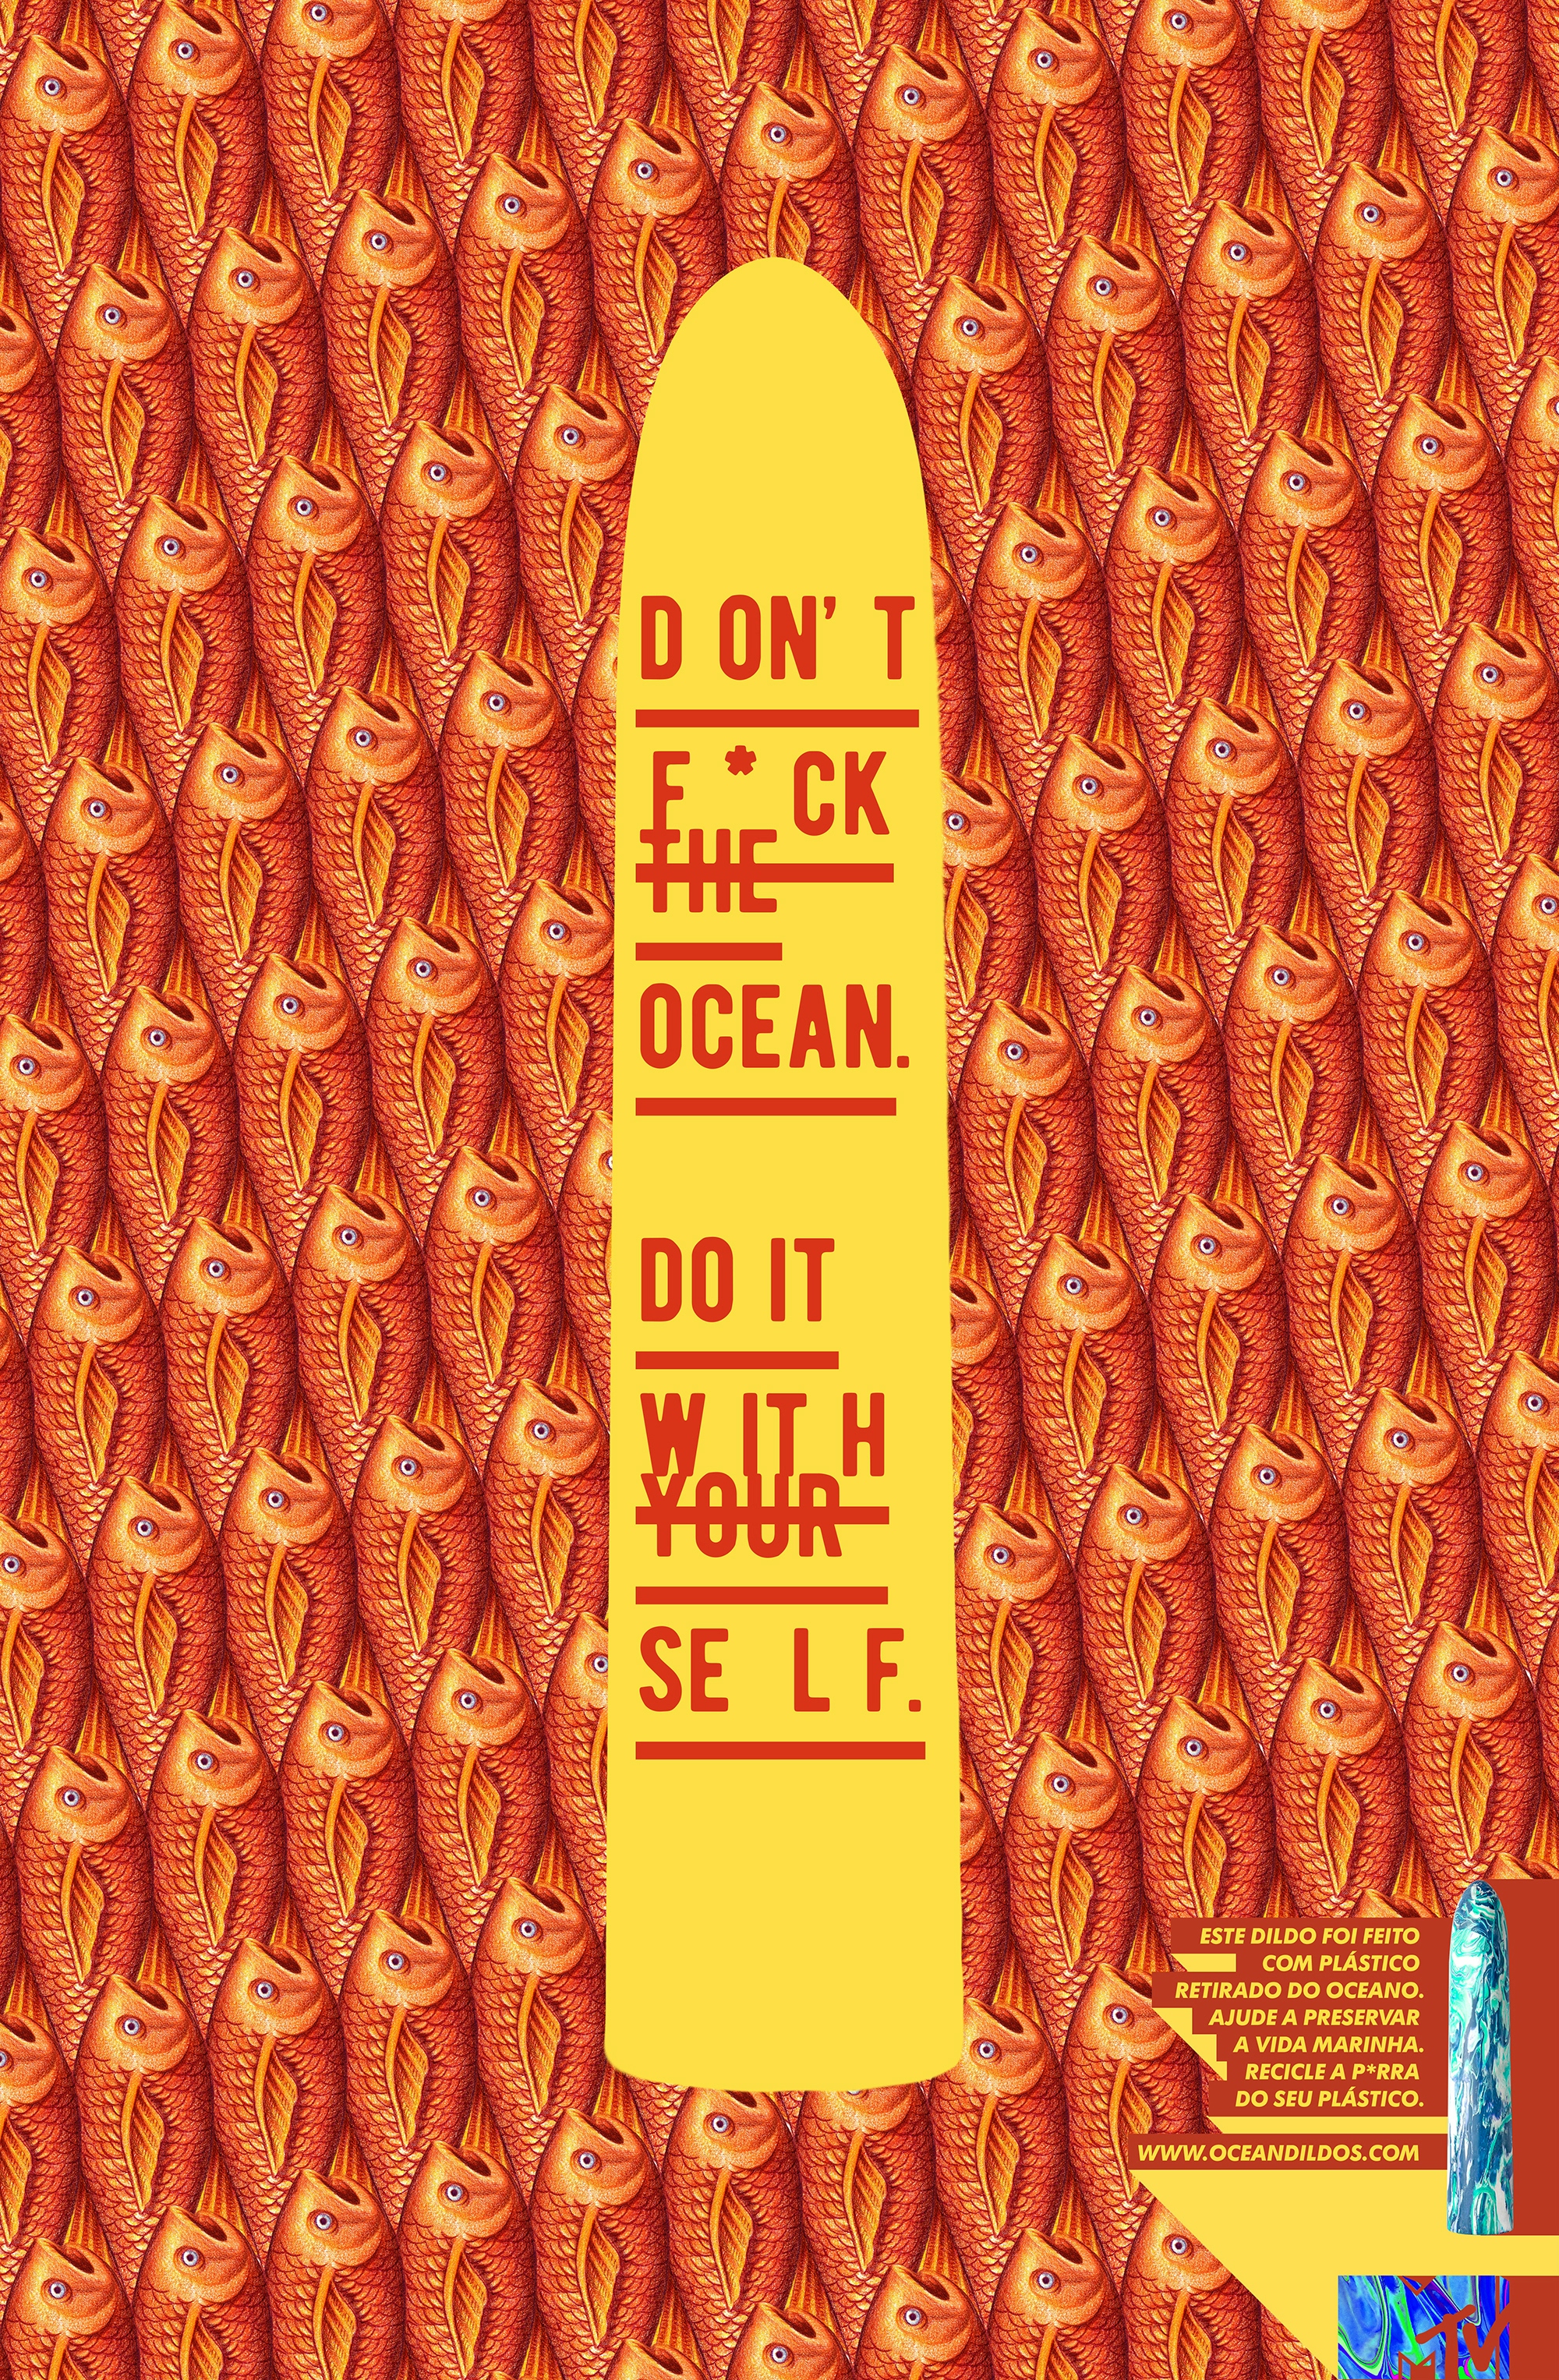 Poster "Don't fuck the ocean. Do it with your self"